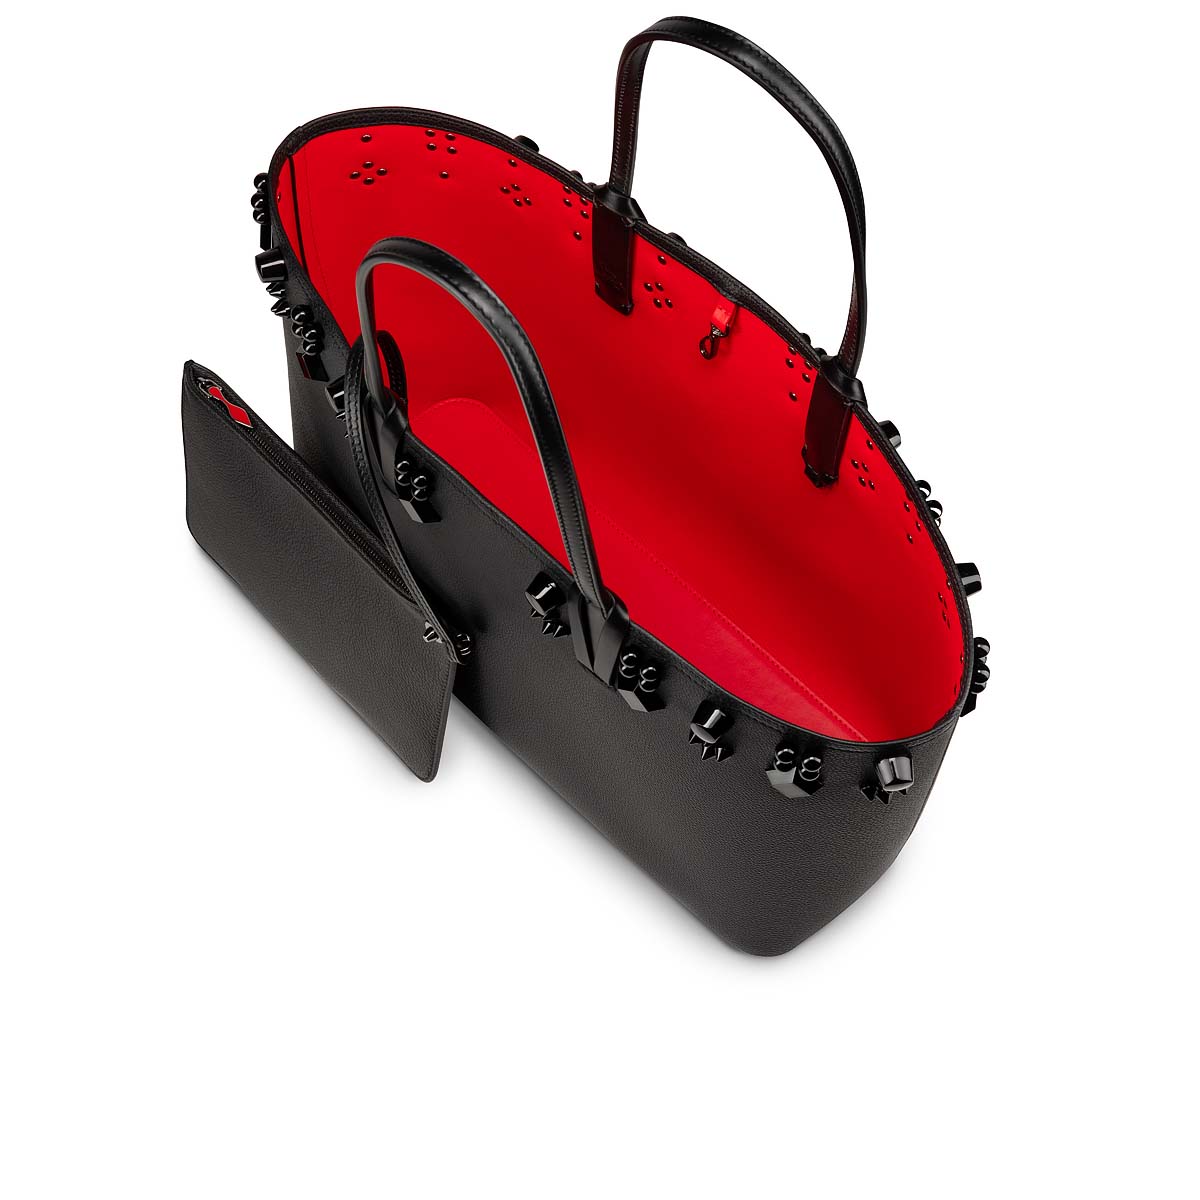 Christian Louboutin Cabata Leather Tote Bag With Spikes And Print in Black